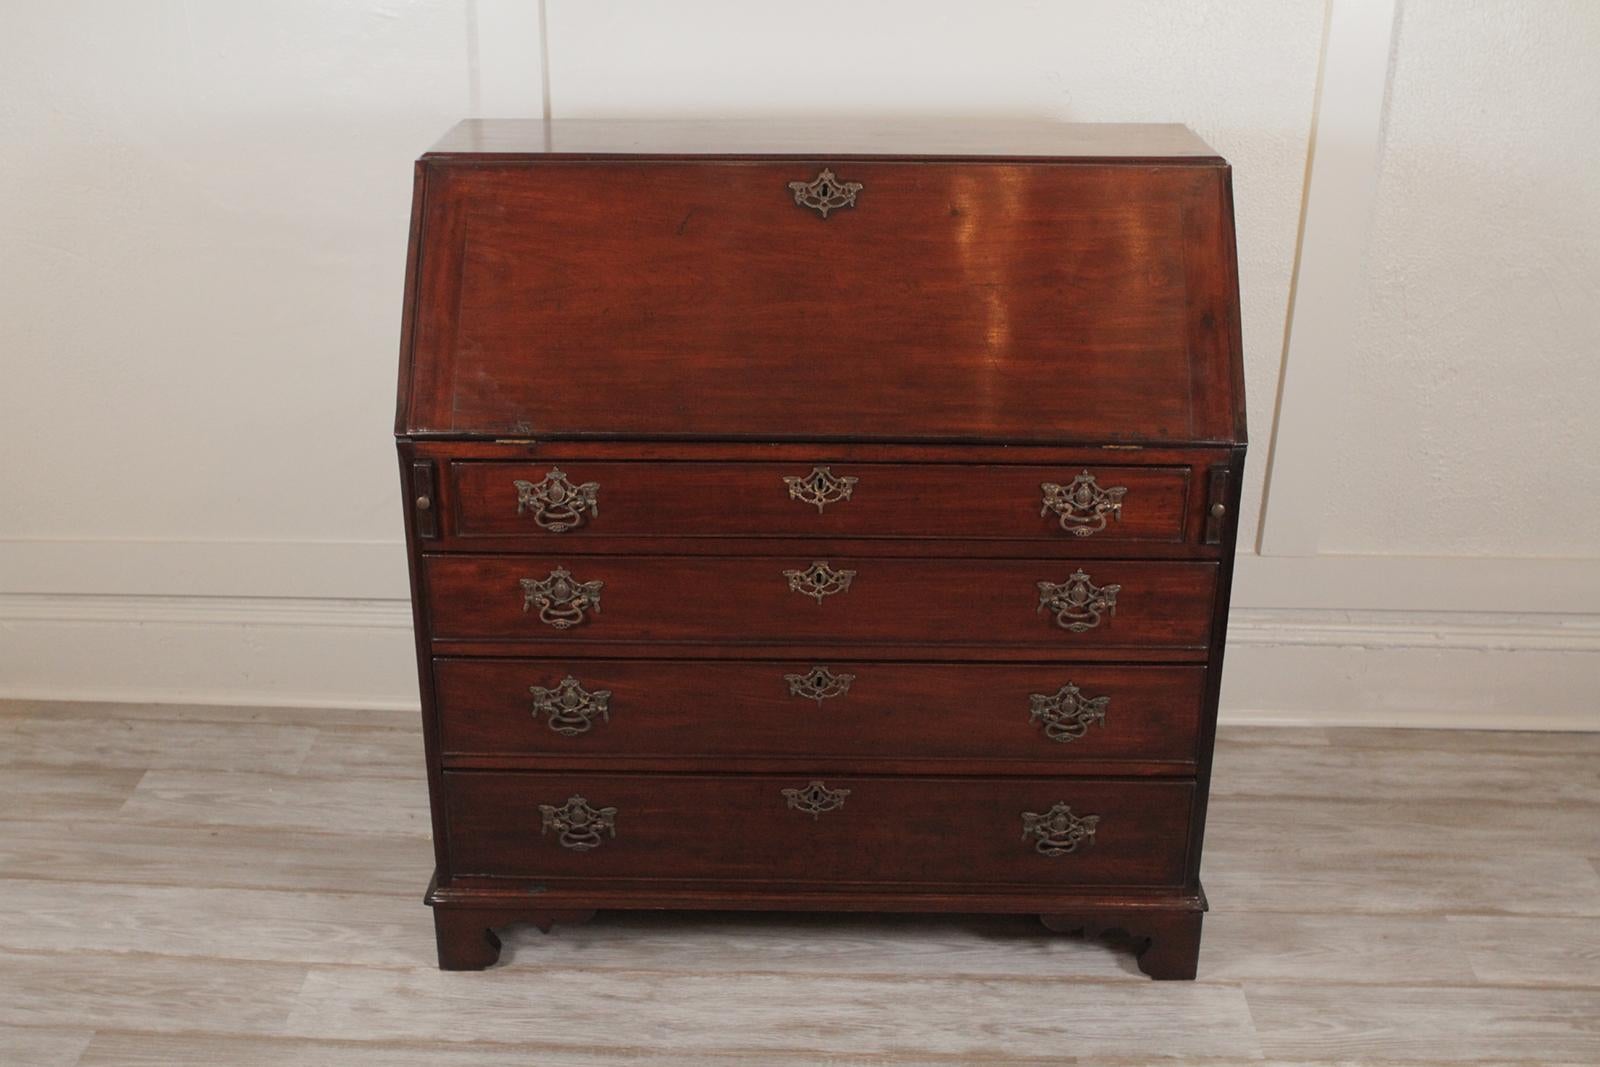 Chippendale mahogany slant front desk, circa 1770-1800. Great quality handcrafted desk probably Made in Pennsylvania.
Dimensions: 40” L x 30” W x 18” D.
    